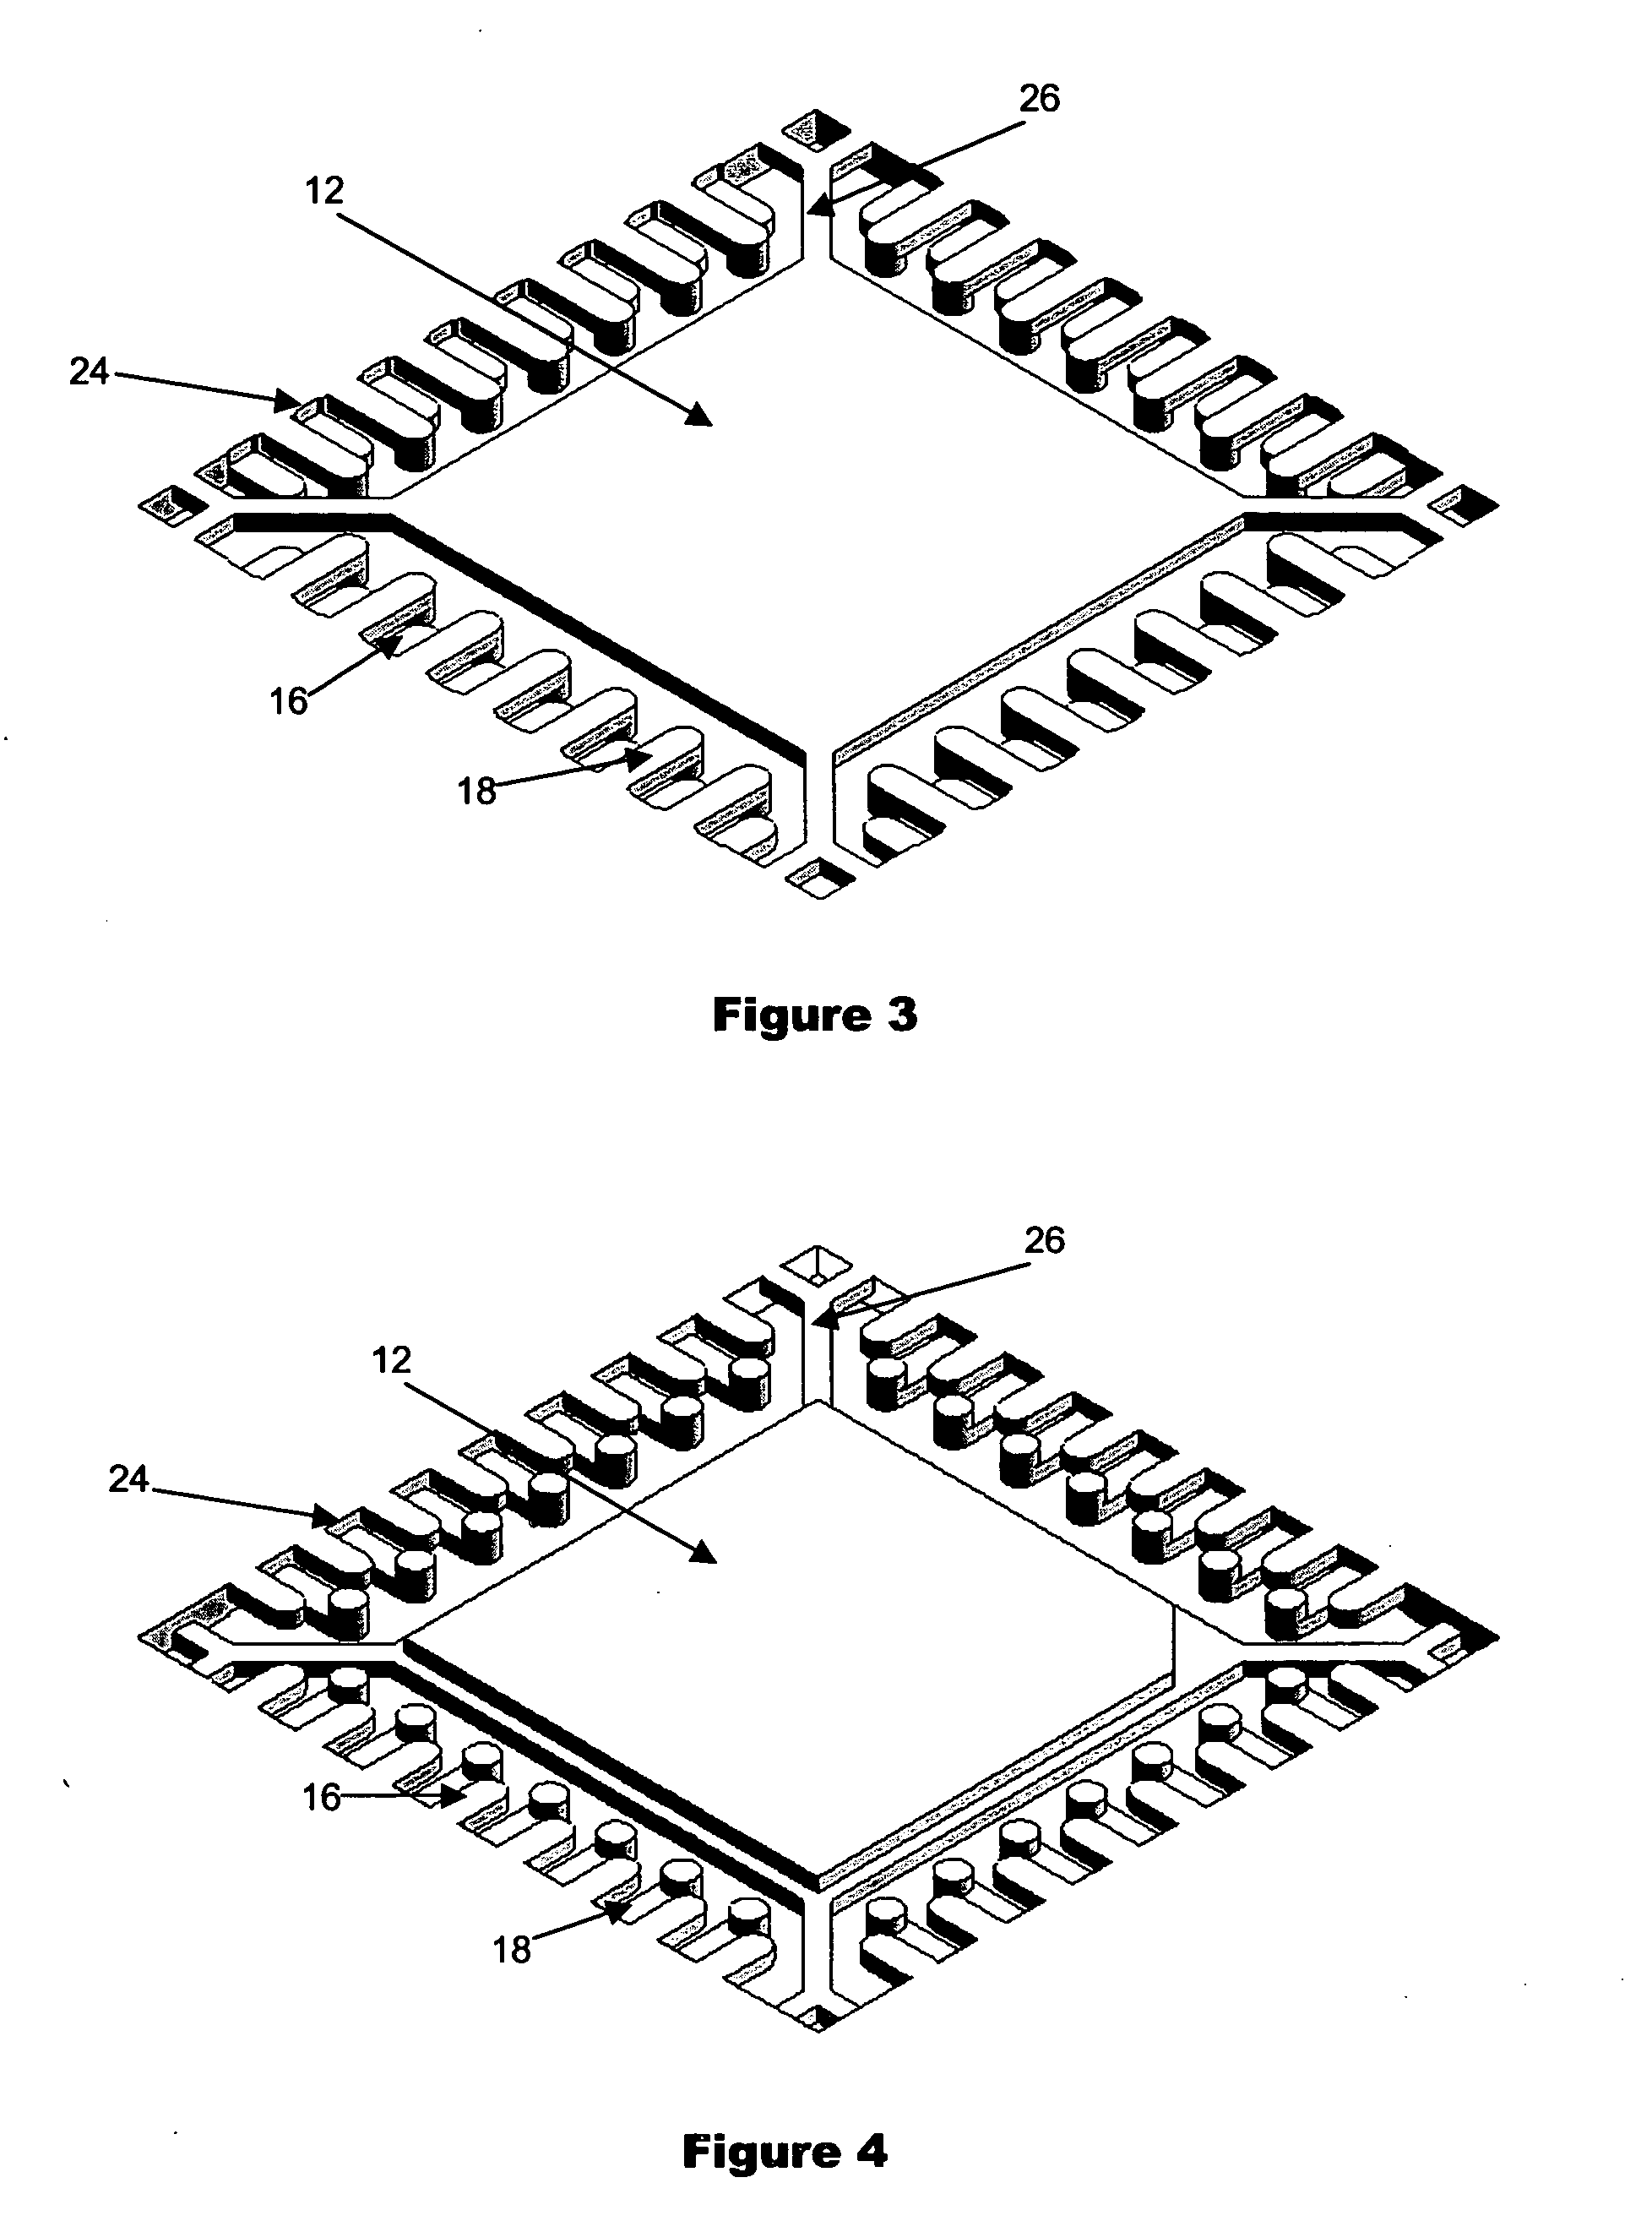 Electronic device with high lead density